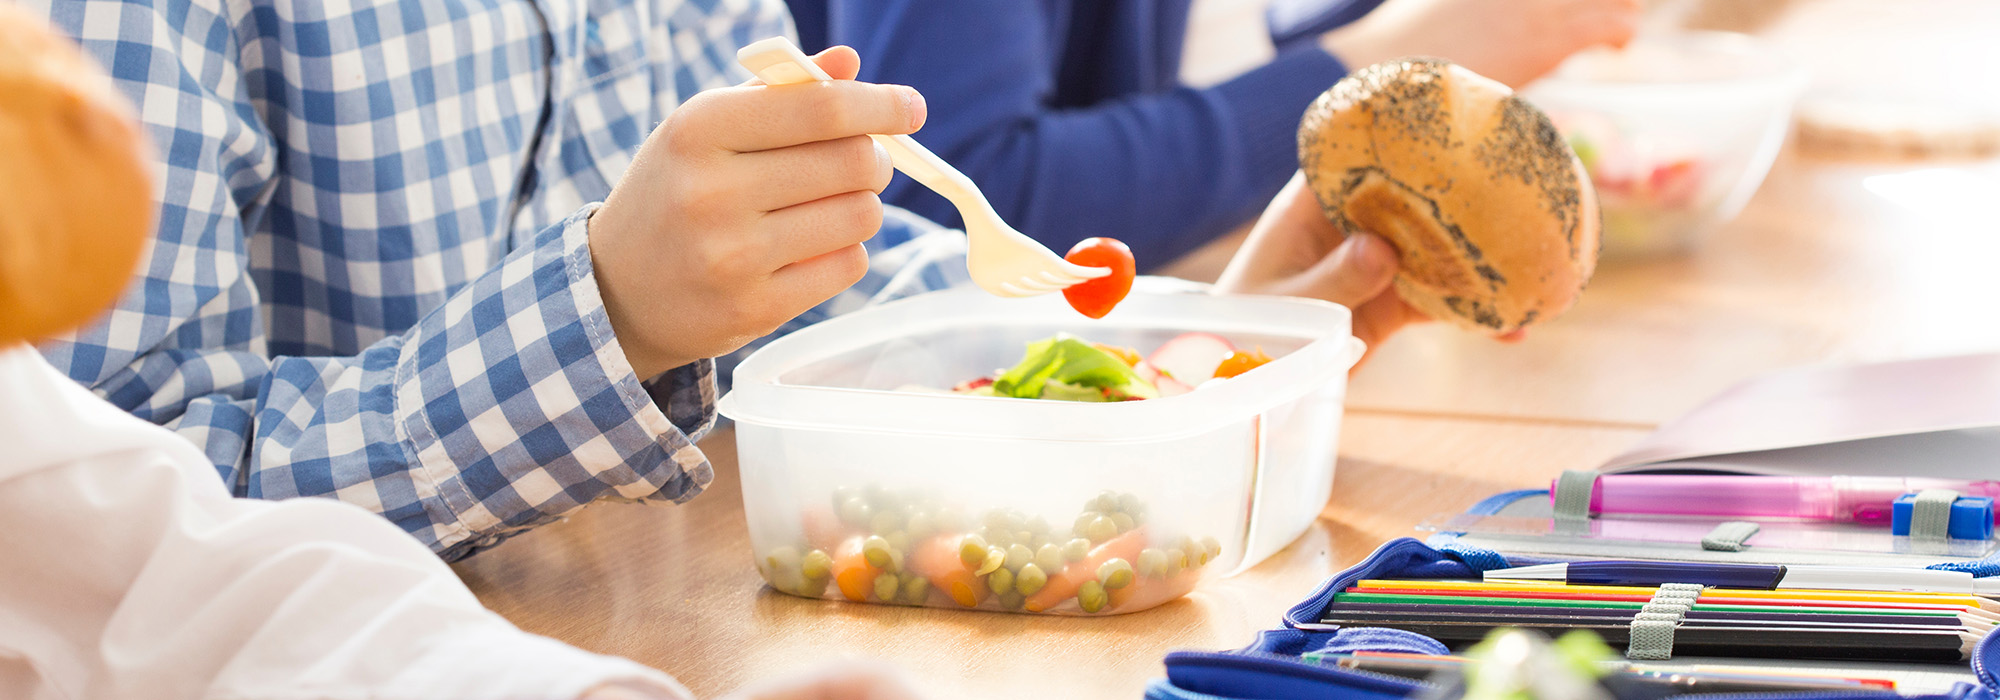 Five Back-To-School Nutrition Tips for Kids